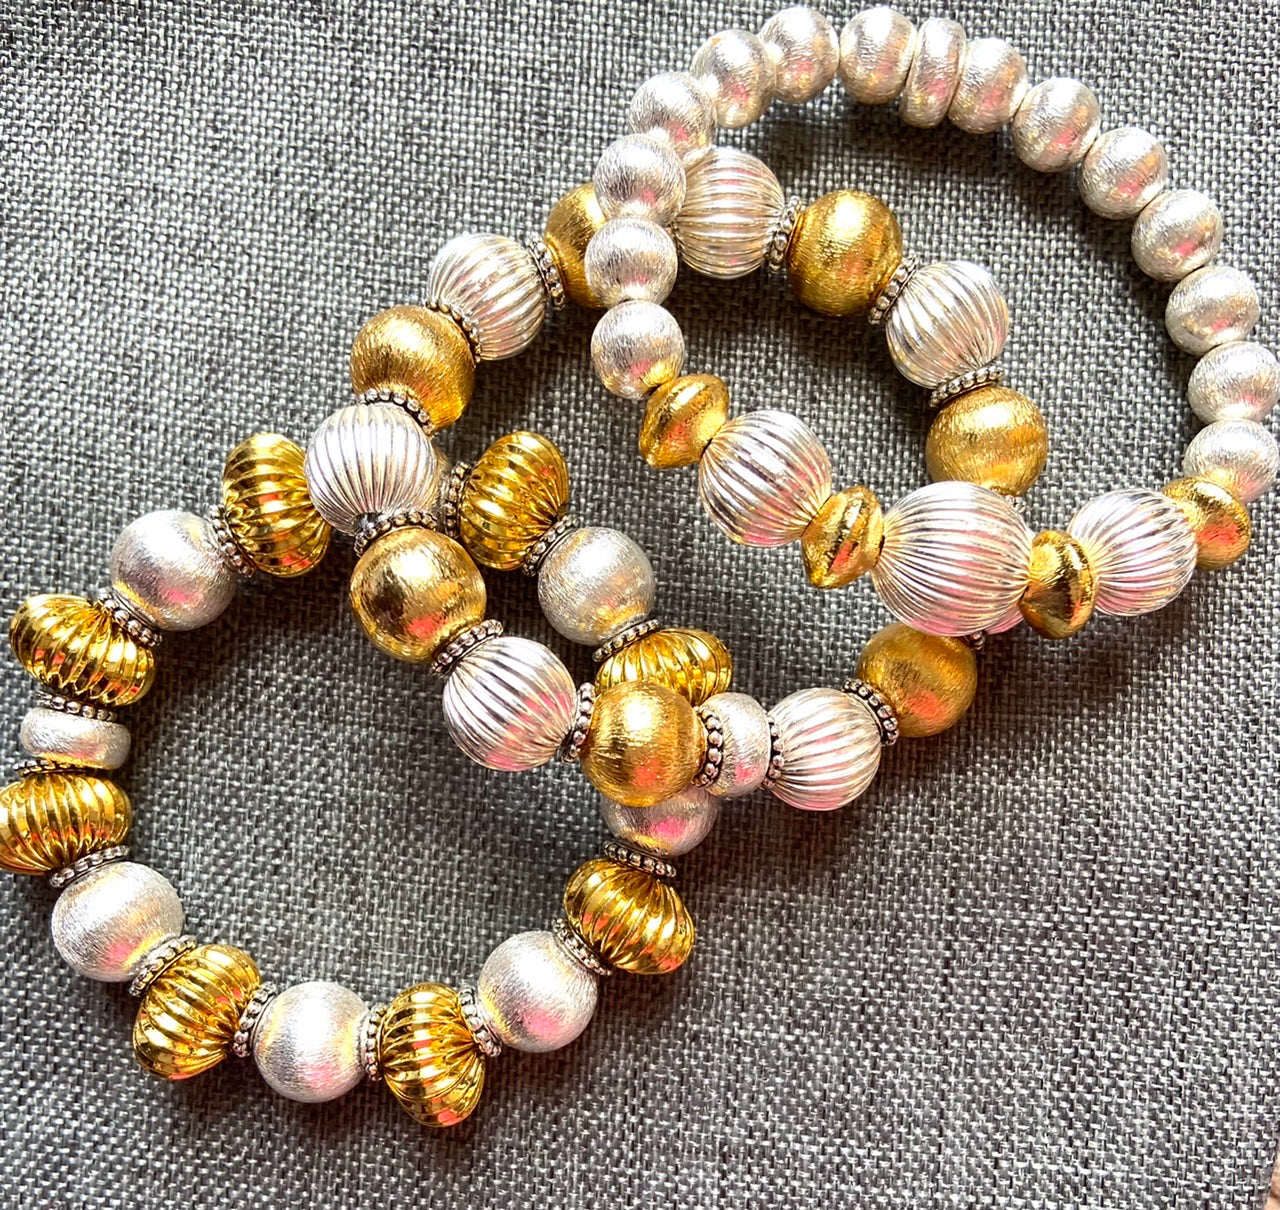 Silver Ribbed (Corrugated) Beads with Brushed Gold Vermeil Beaded Bracelet